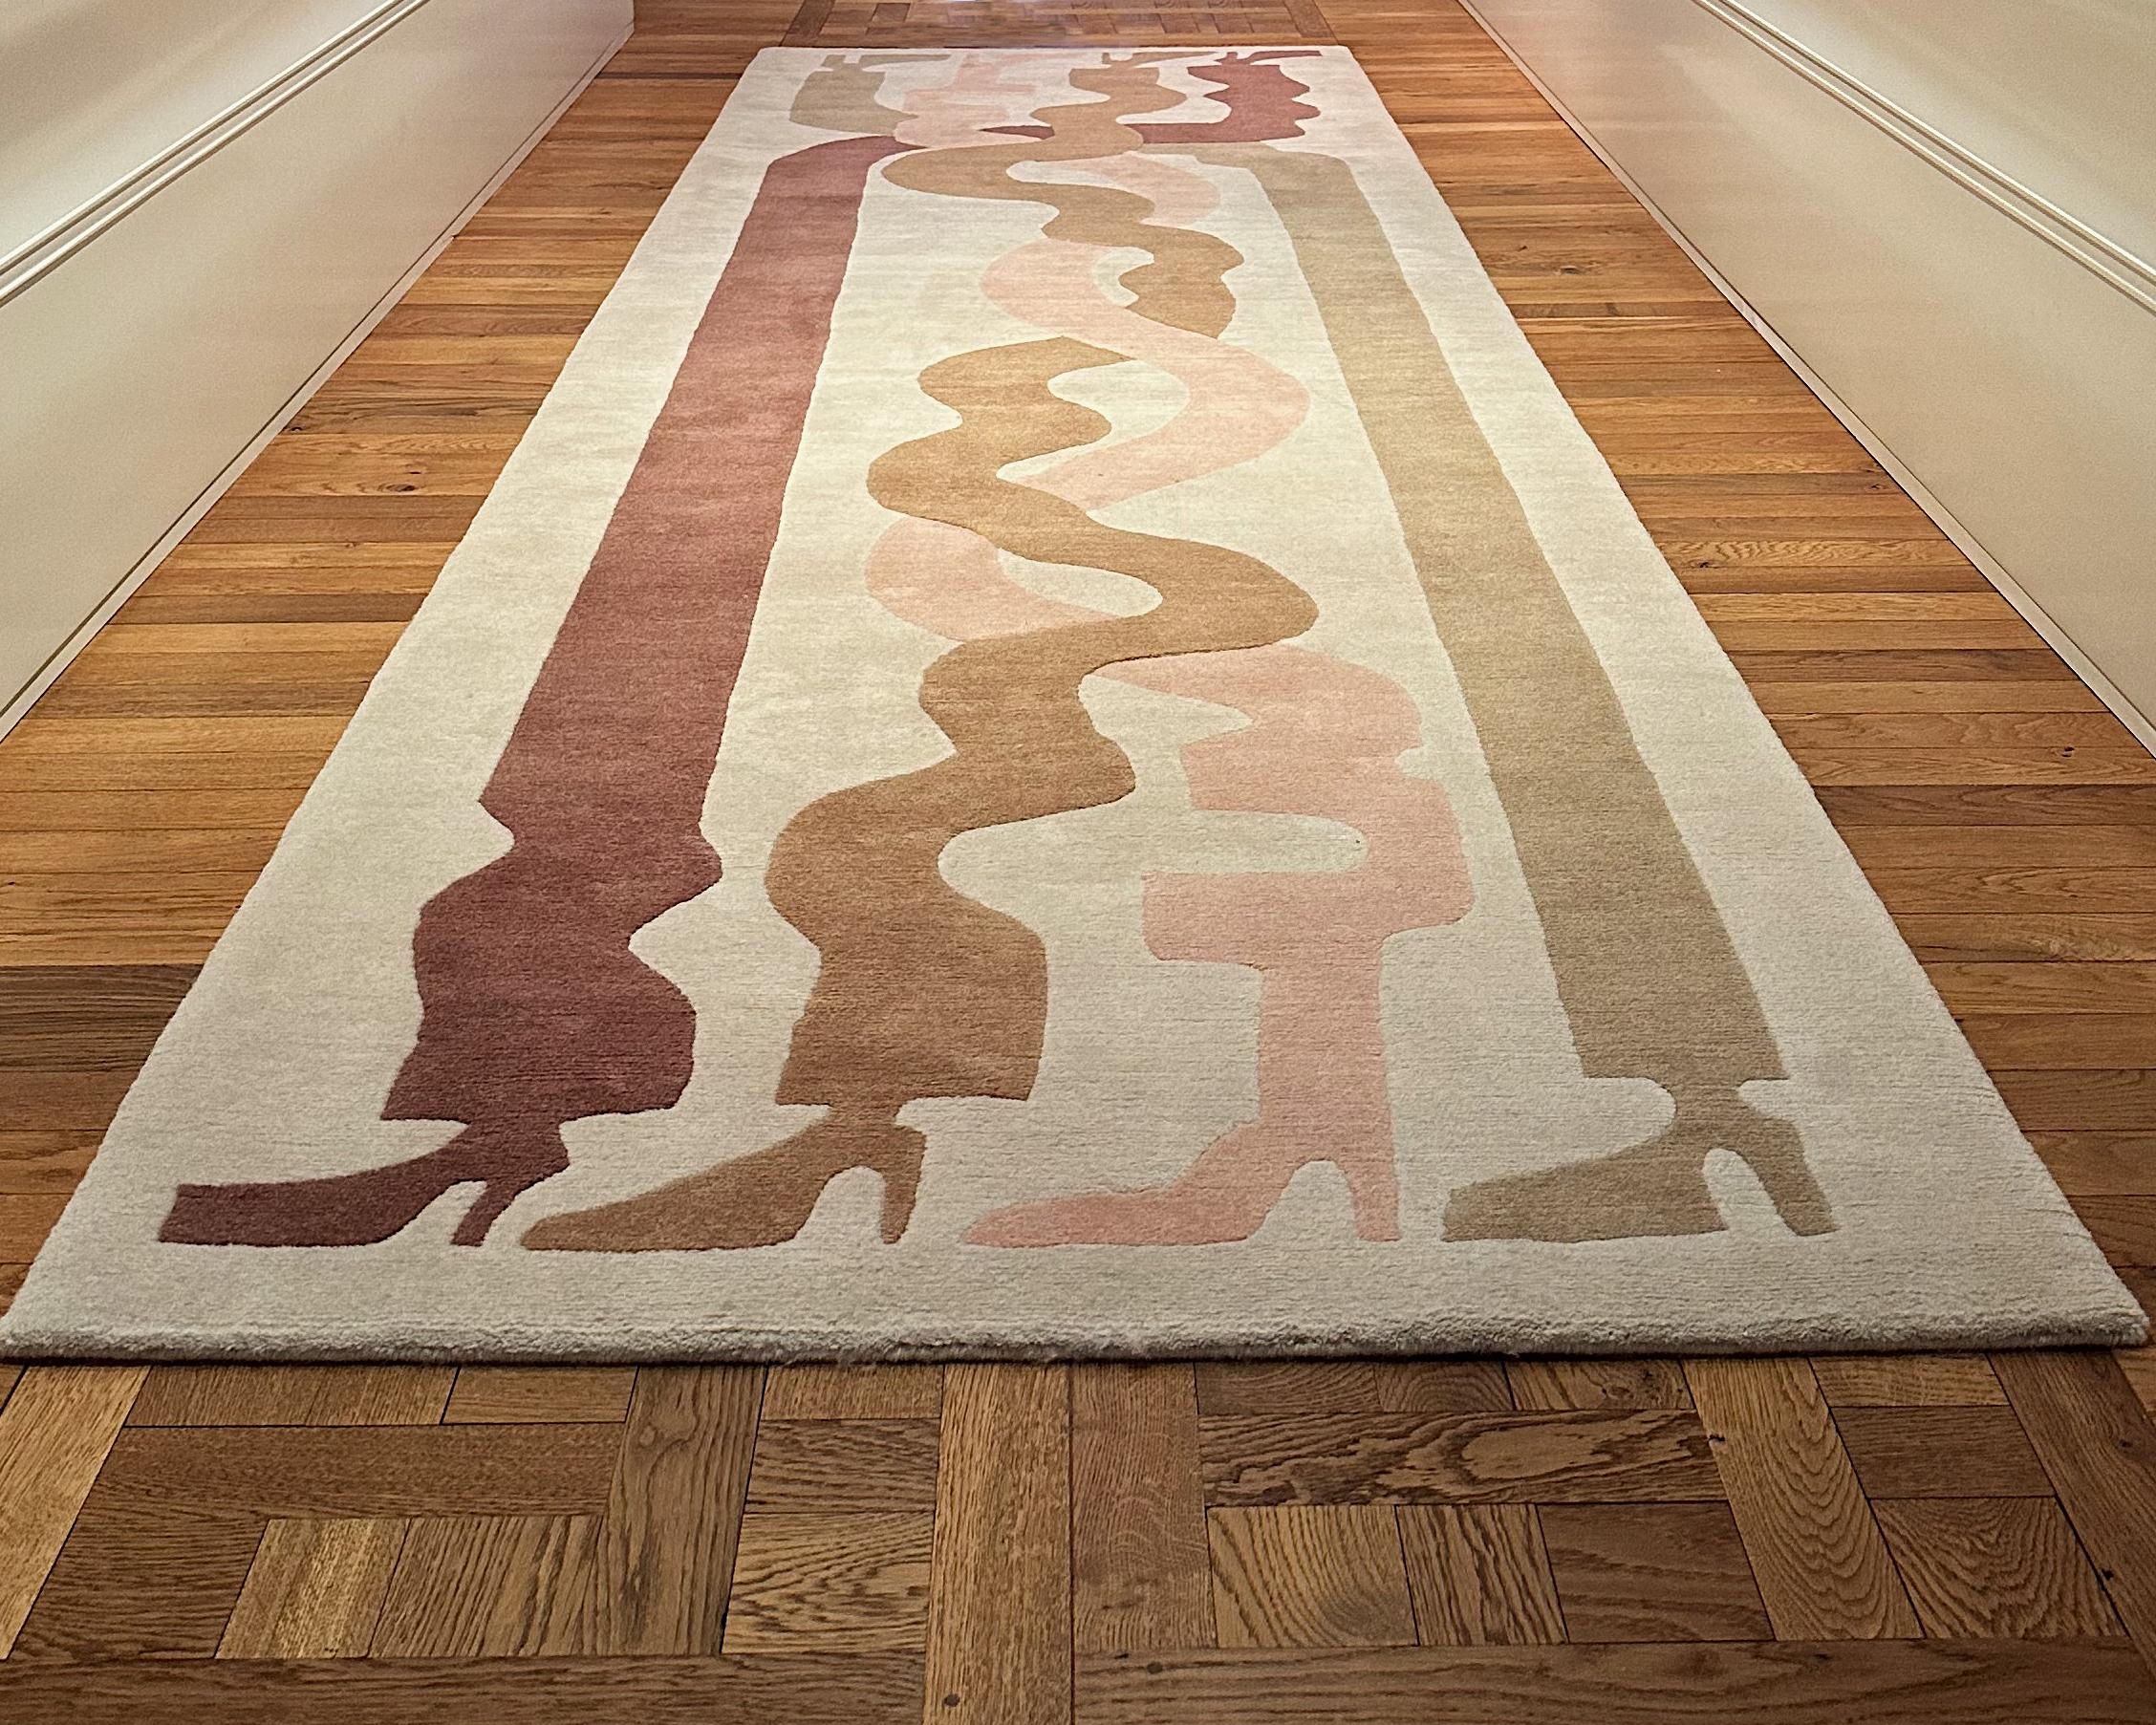 Original design by Jazmín Berakha, 2022

LALANA RUGS is an applied arts initiative born from the desire to combine proposals by contemporary artists with traditional local techniques and noble materials. The three “As” of LA-LA-NA come together in